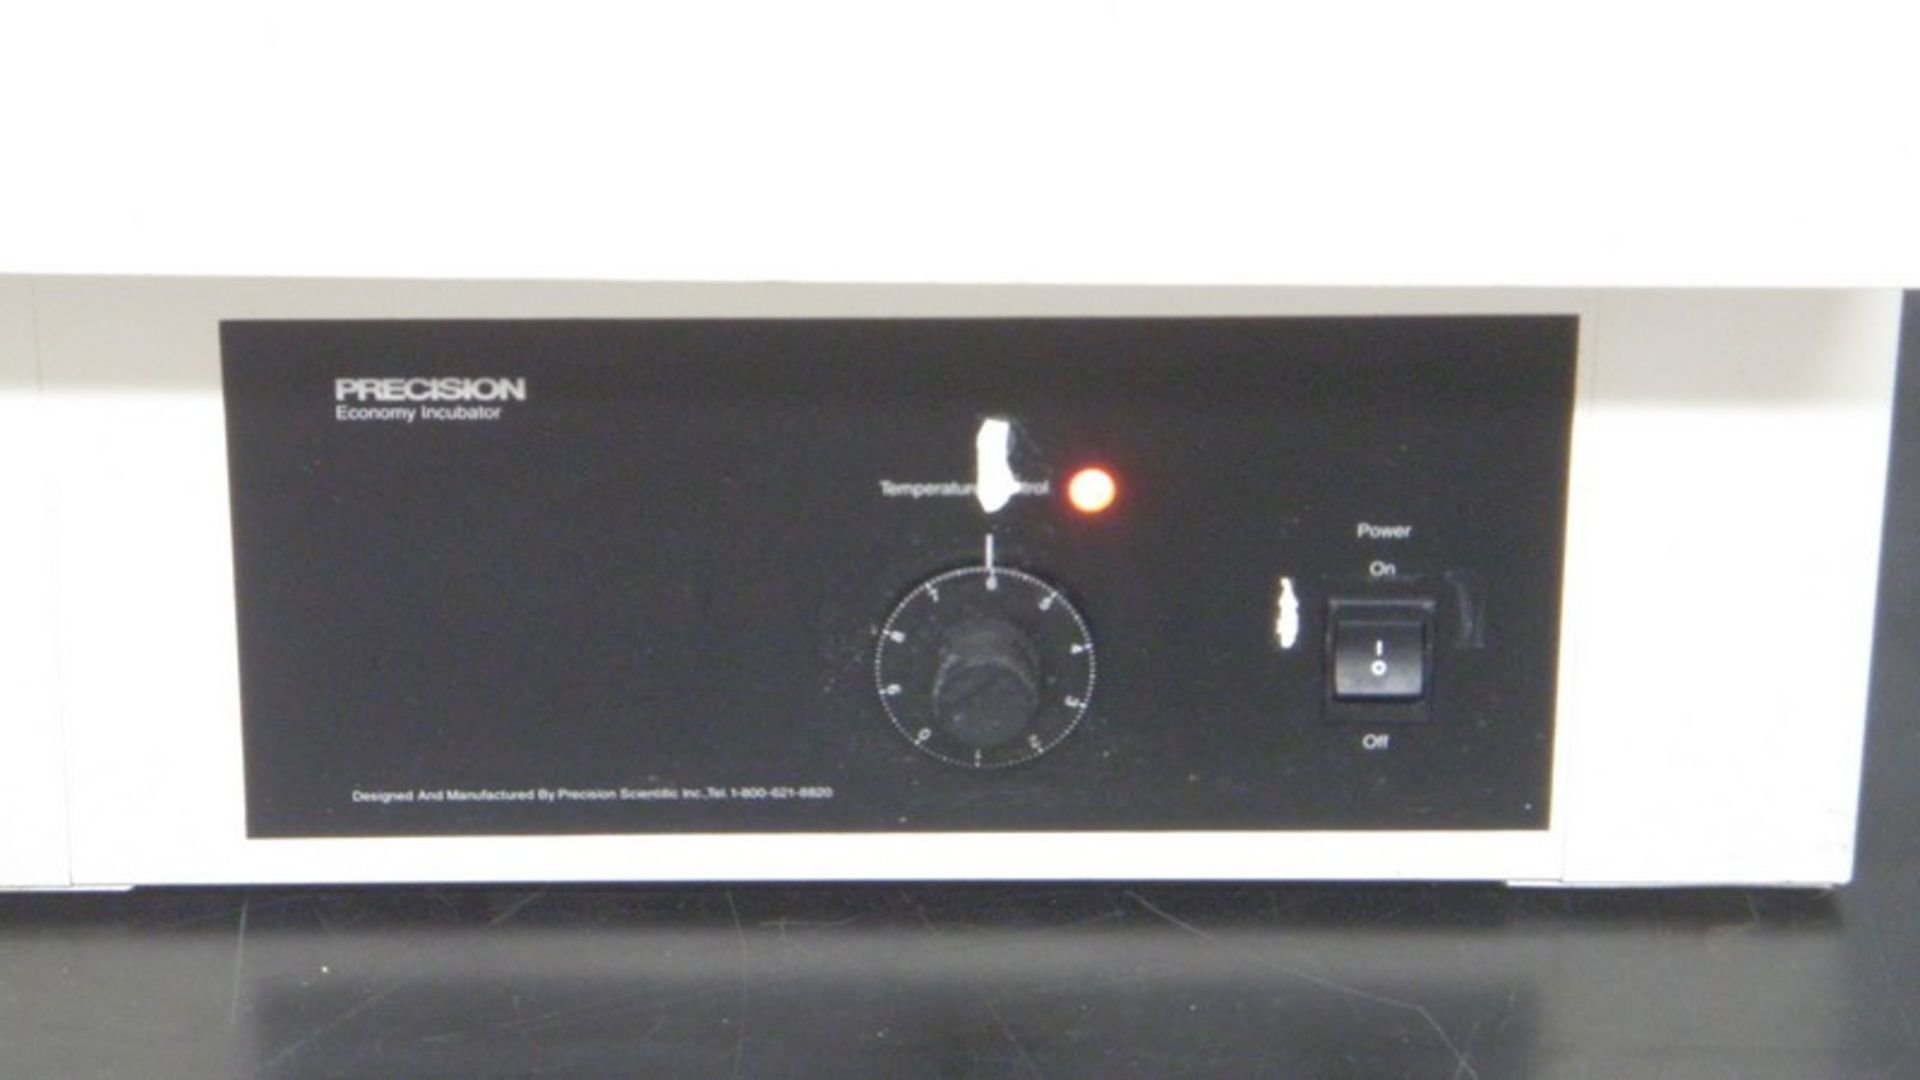 Precision Economy Incubator Cat. No. 31570, S/N 9601-003 (NOTE: Powers On & Heats Up, Missing - Image 6 of 11